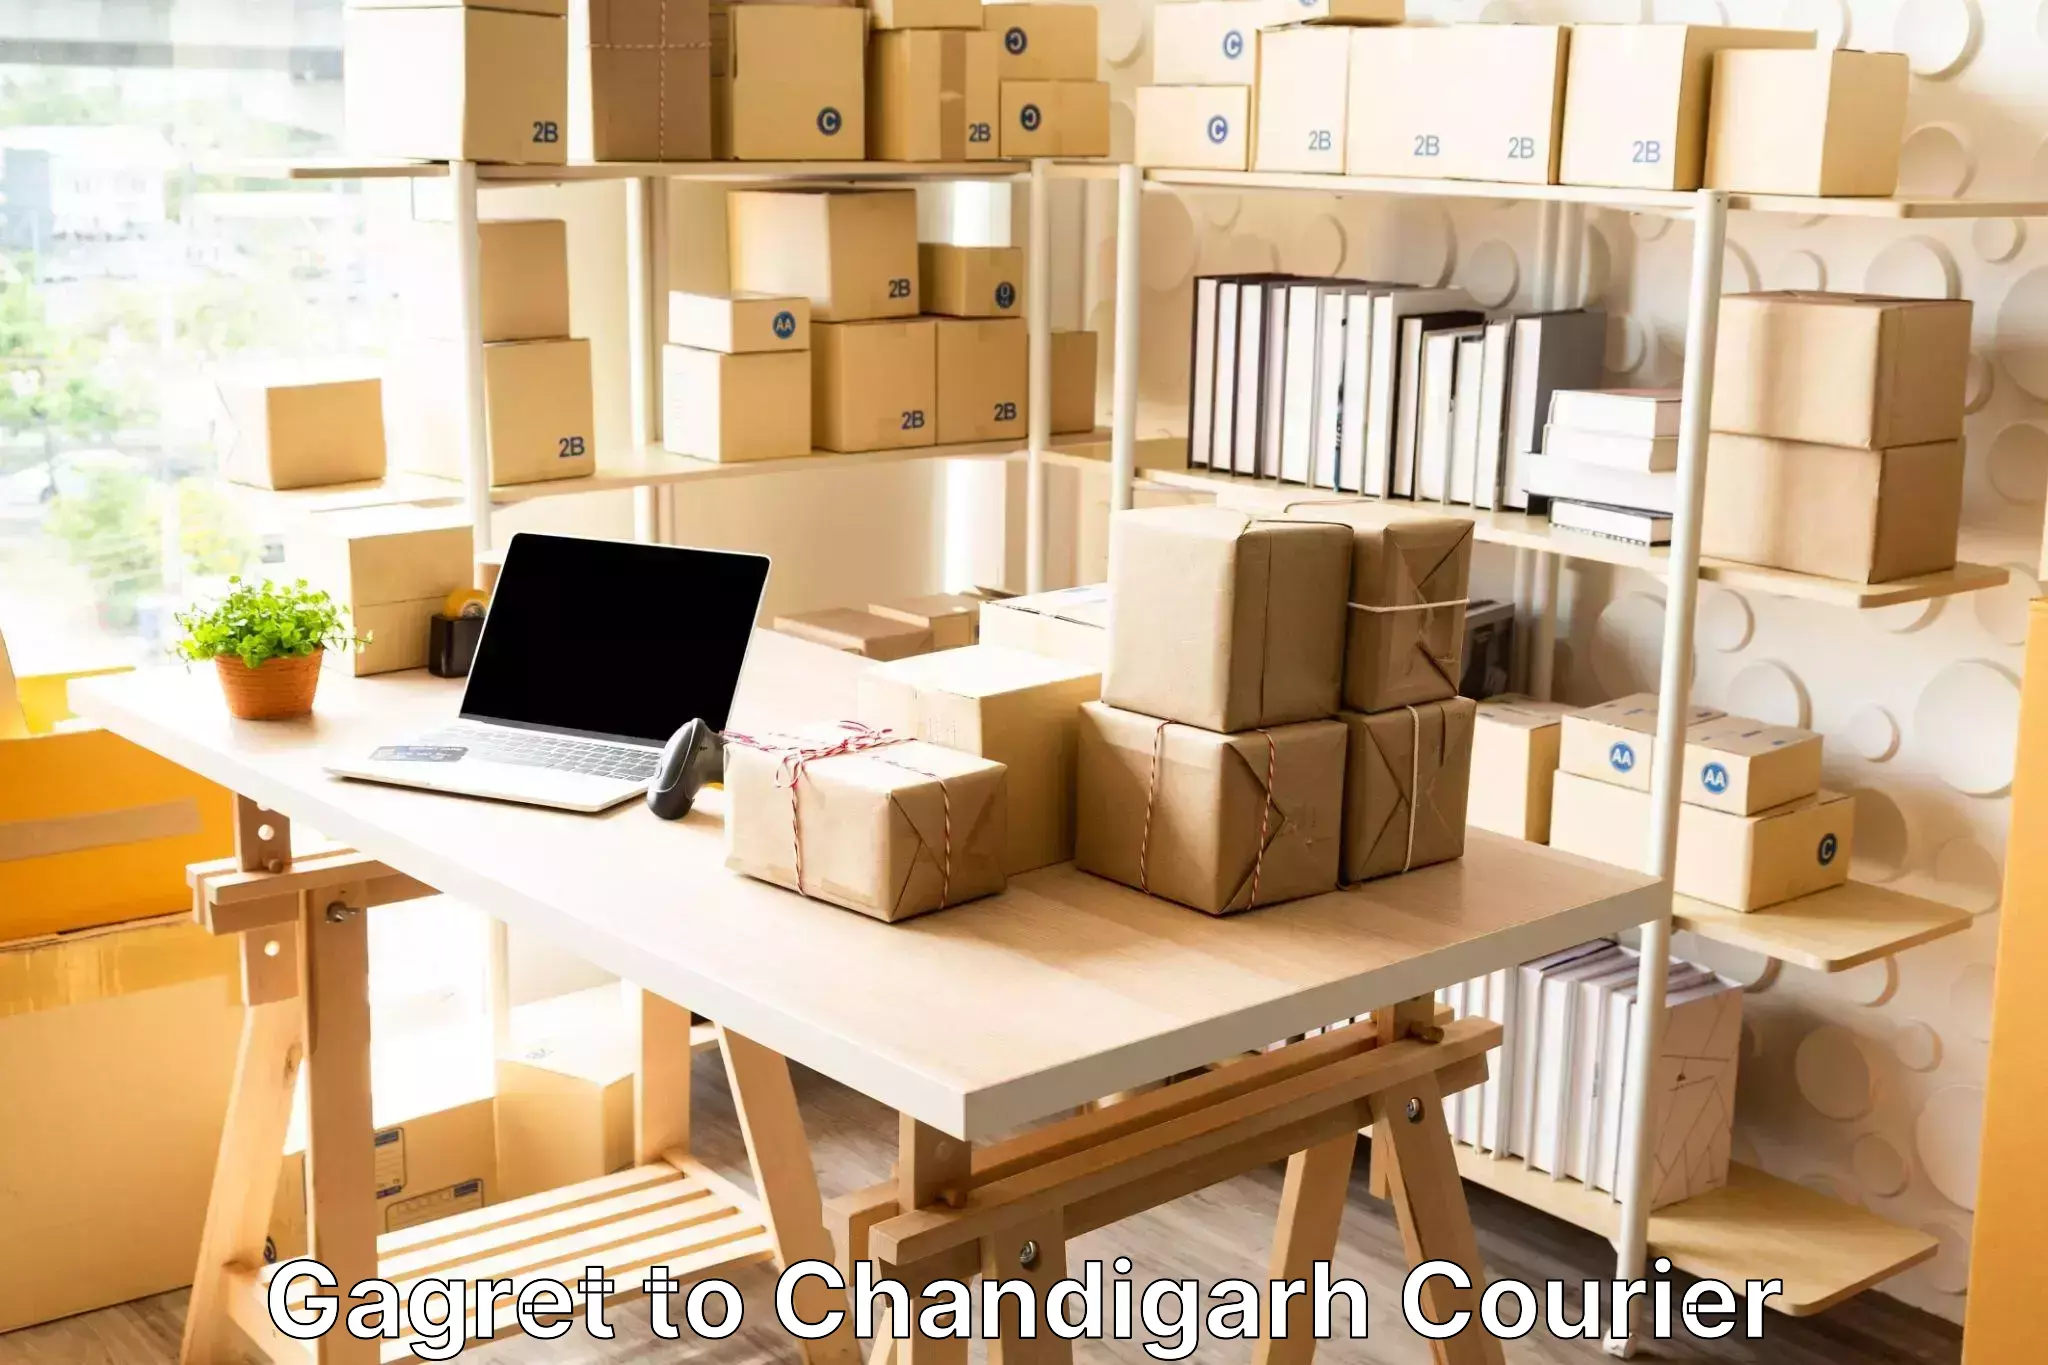 Automated luggage transport Gagret to Chandigarh